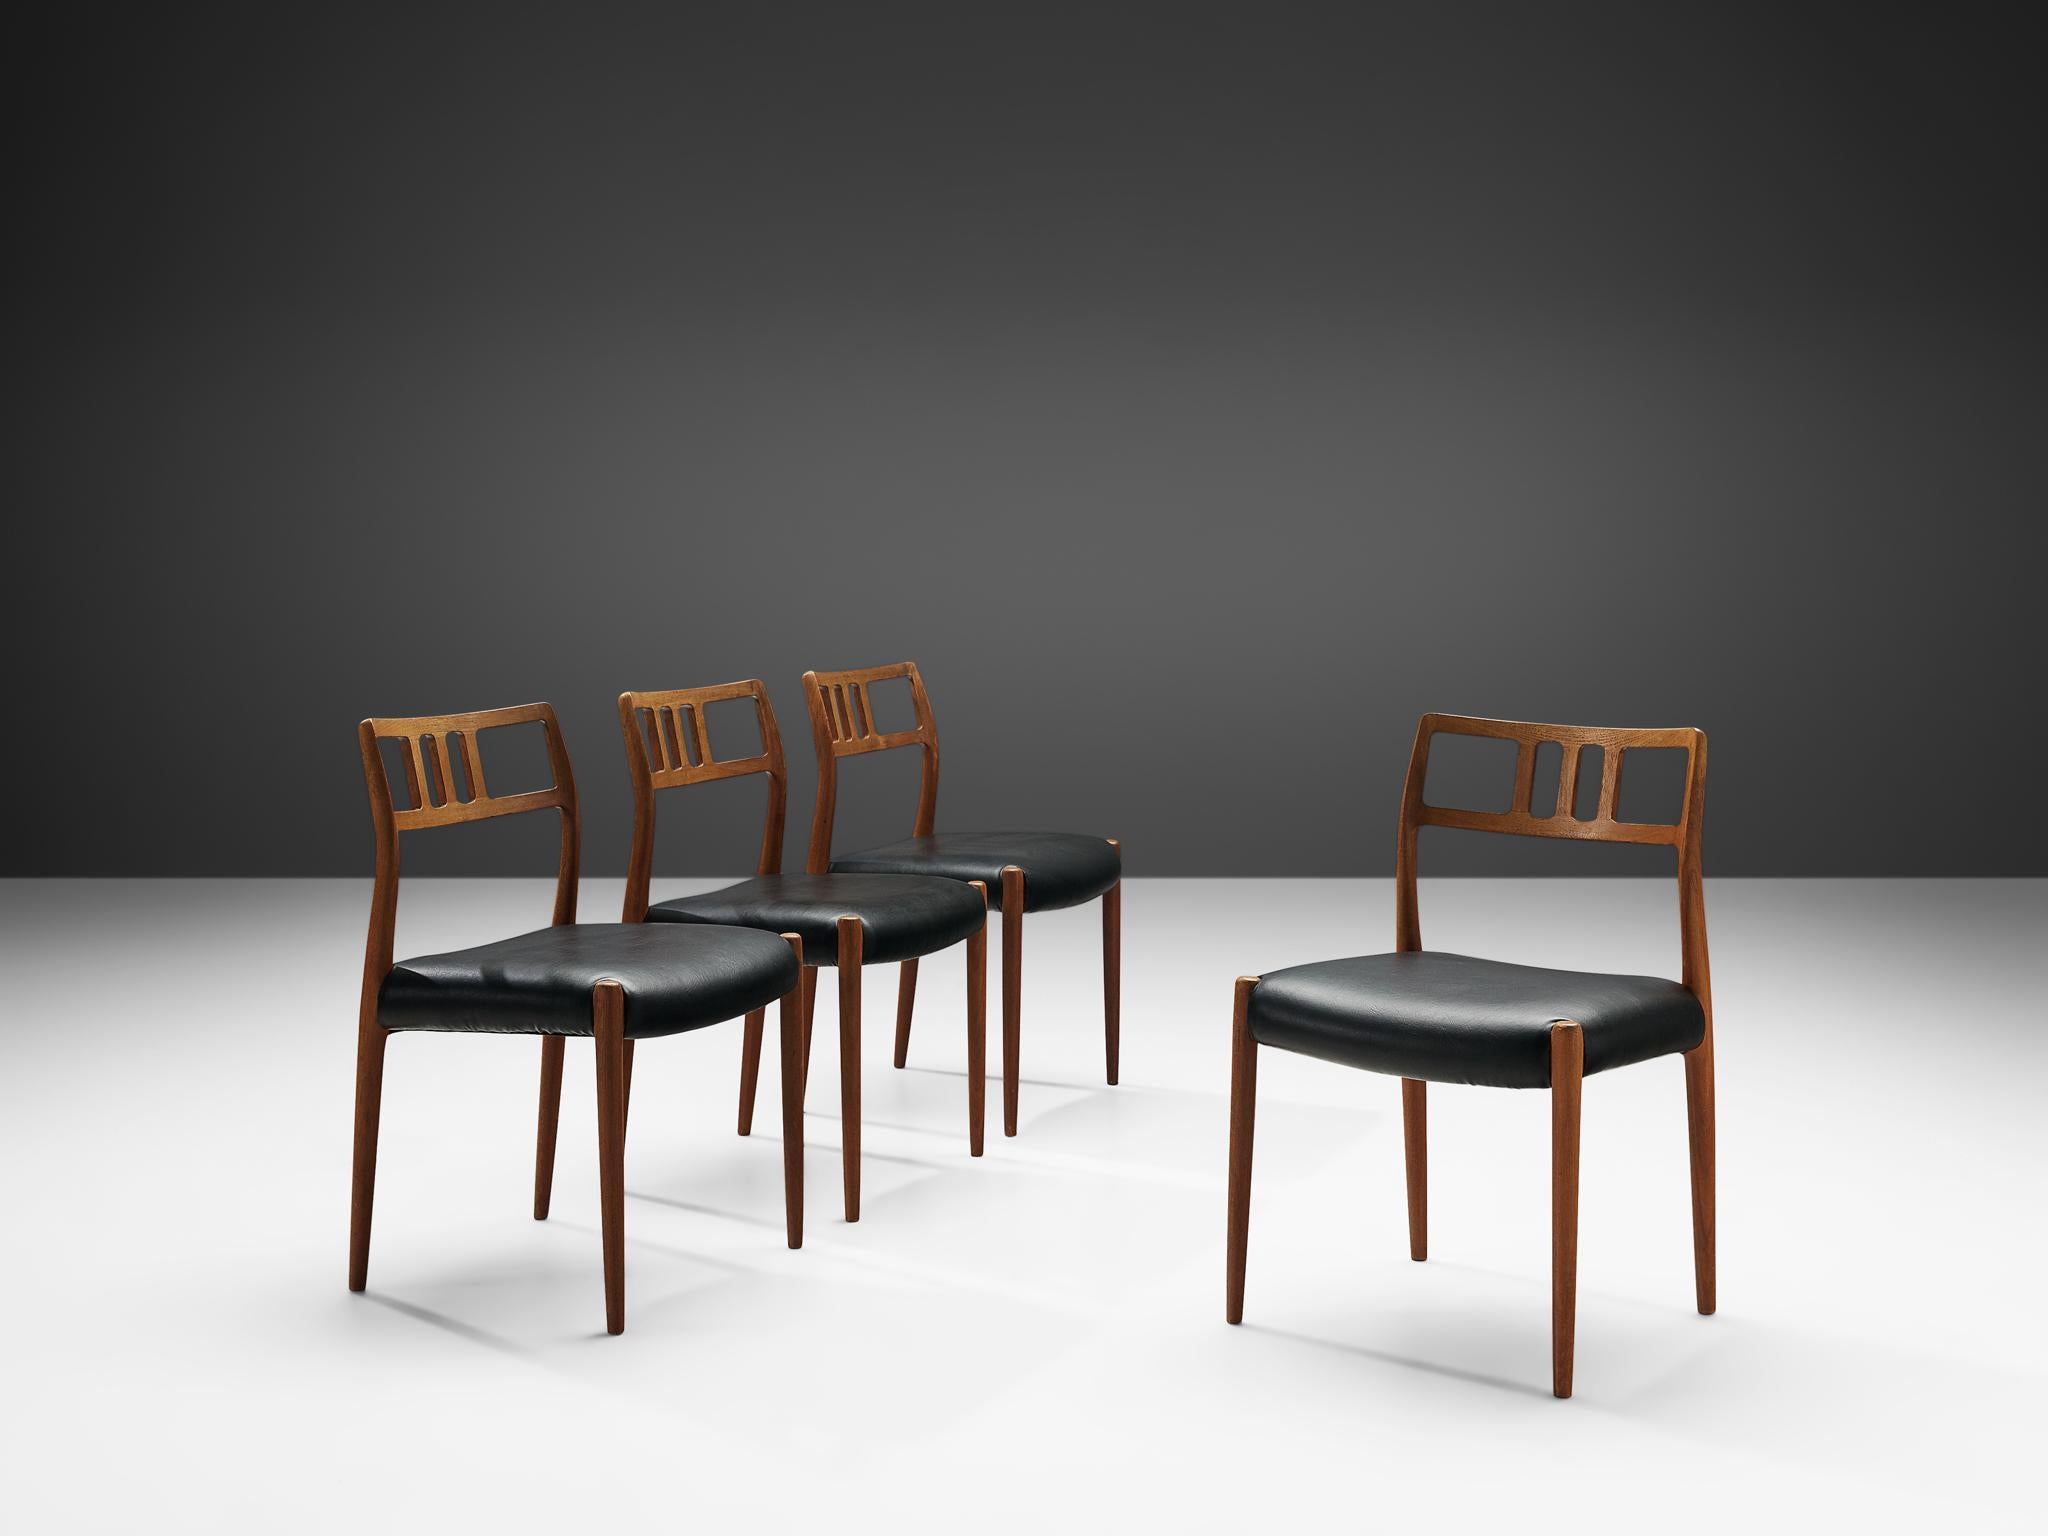 Niels Otto Møller for J. L. Møller, set of dining chairs, model ´79´, teak and leather, Denmark, 1960s.

A set of four beautifully crafted model ´79´ dining chairs. The design shows Niels Otto Møller's great craftsmanship and eye for detail, which